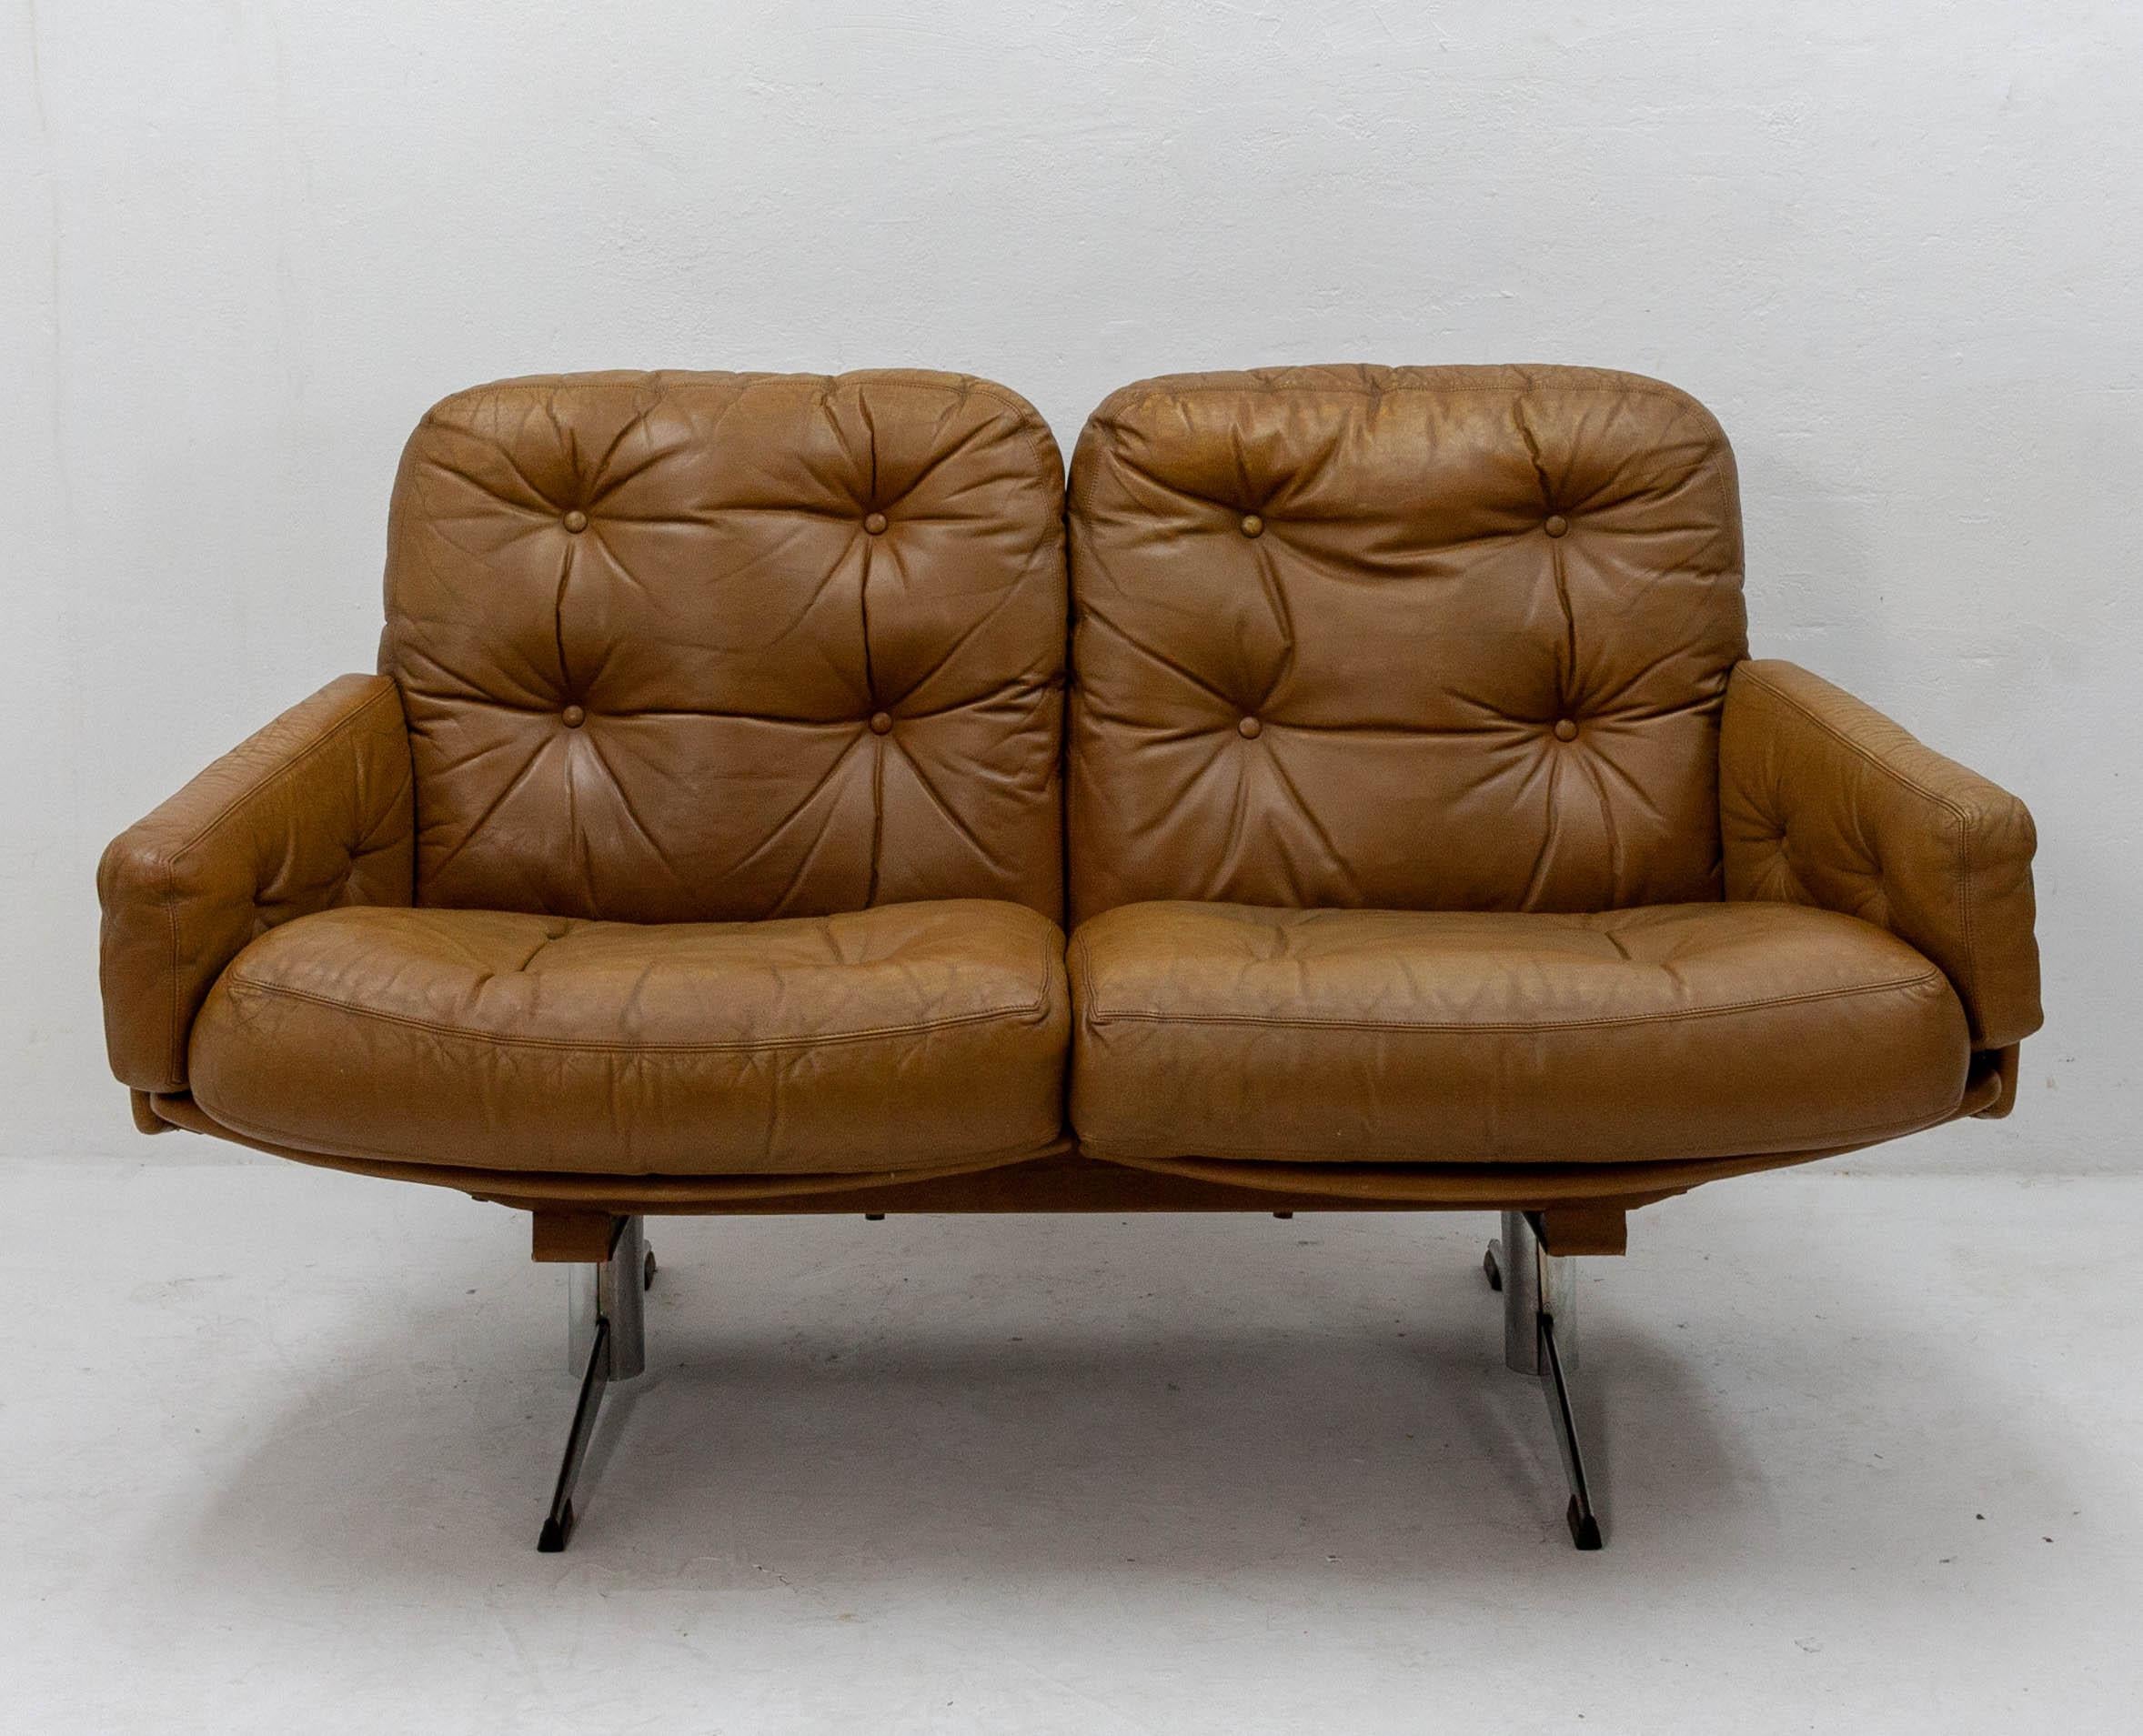 Comfortable and stylish leather loveseat featuring curved armrests and chrome feet. Caramel leather showing some patina, Italy, 1960s.